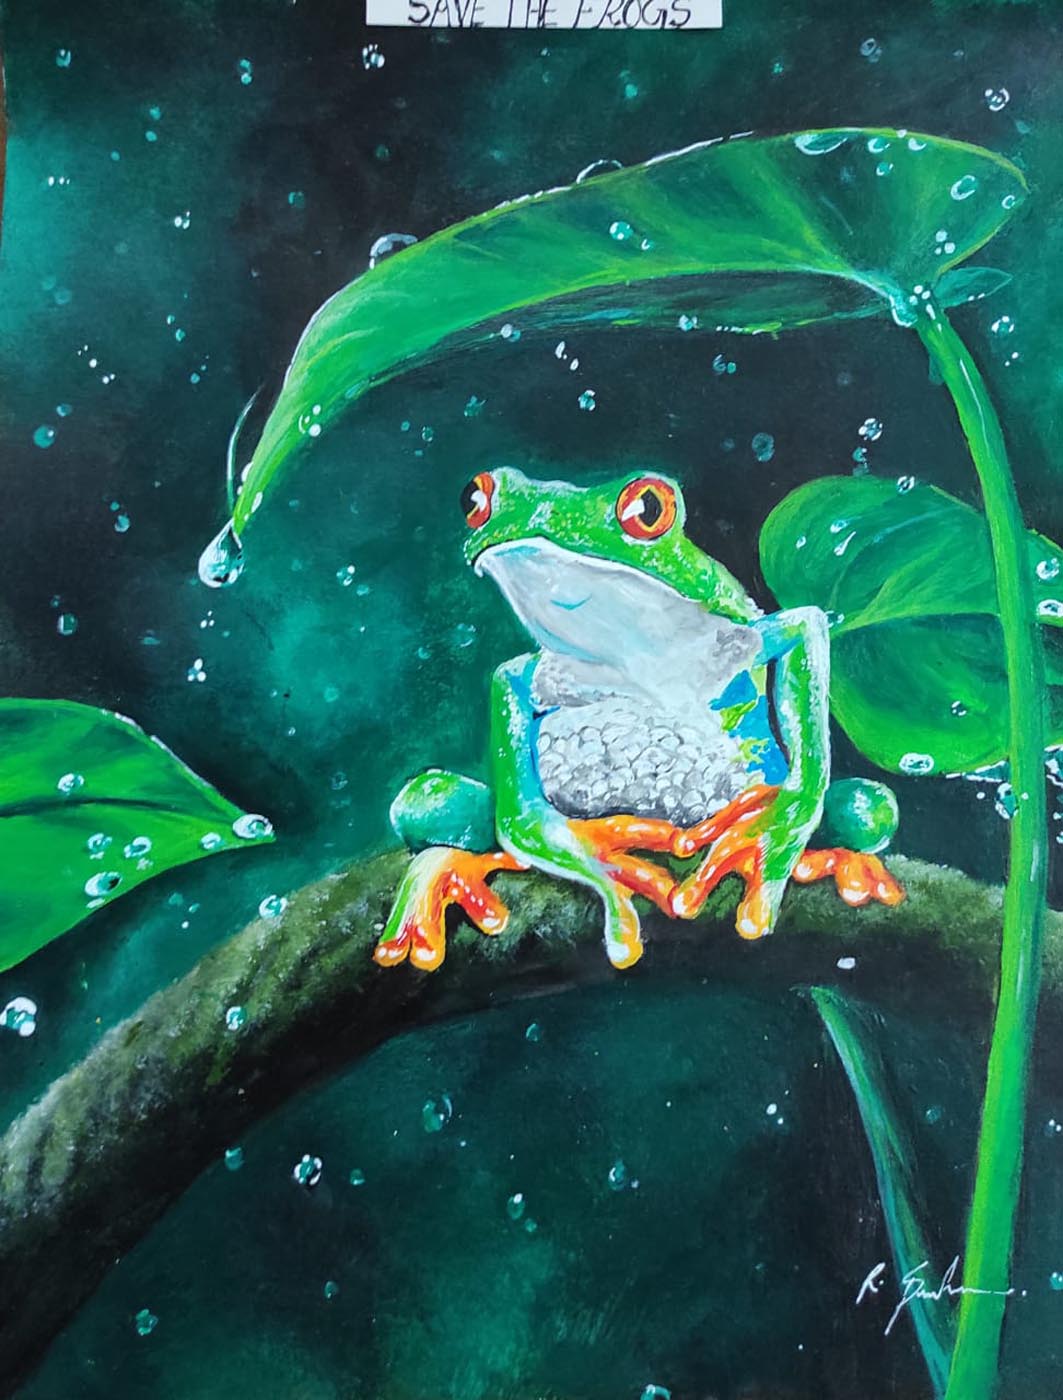 R.sayali-Queen-India-2021-save-the-frogs-art-contest-1